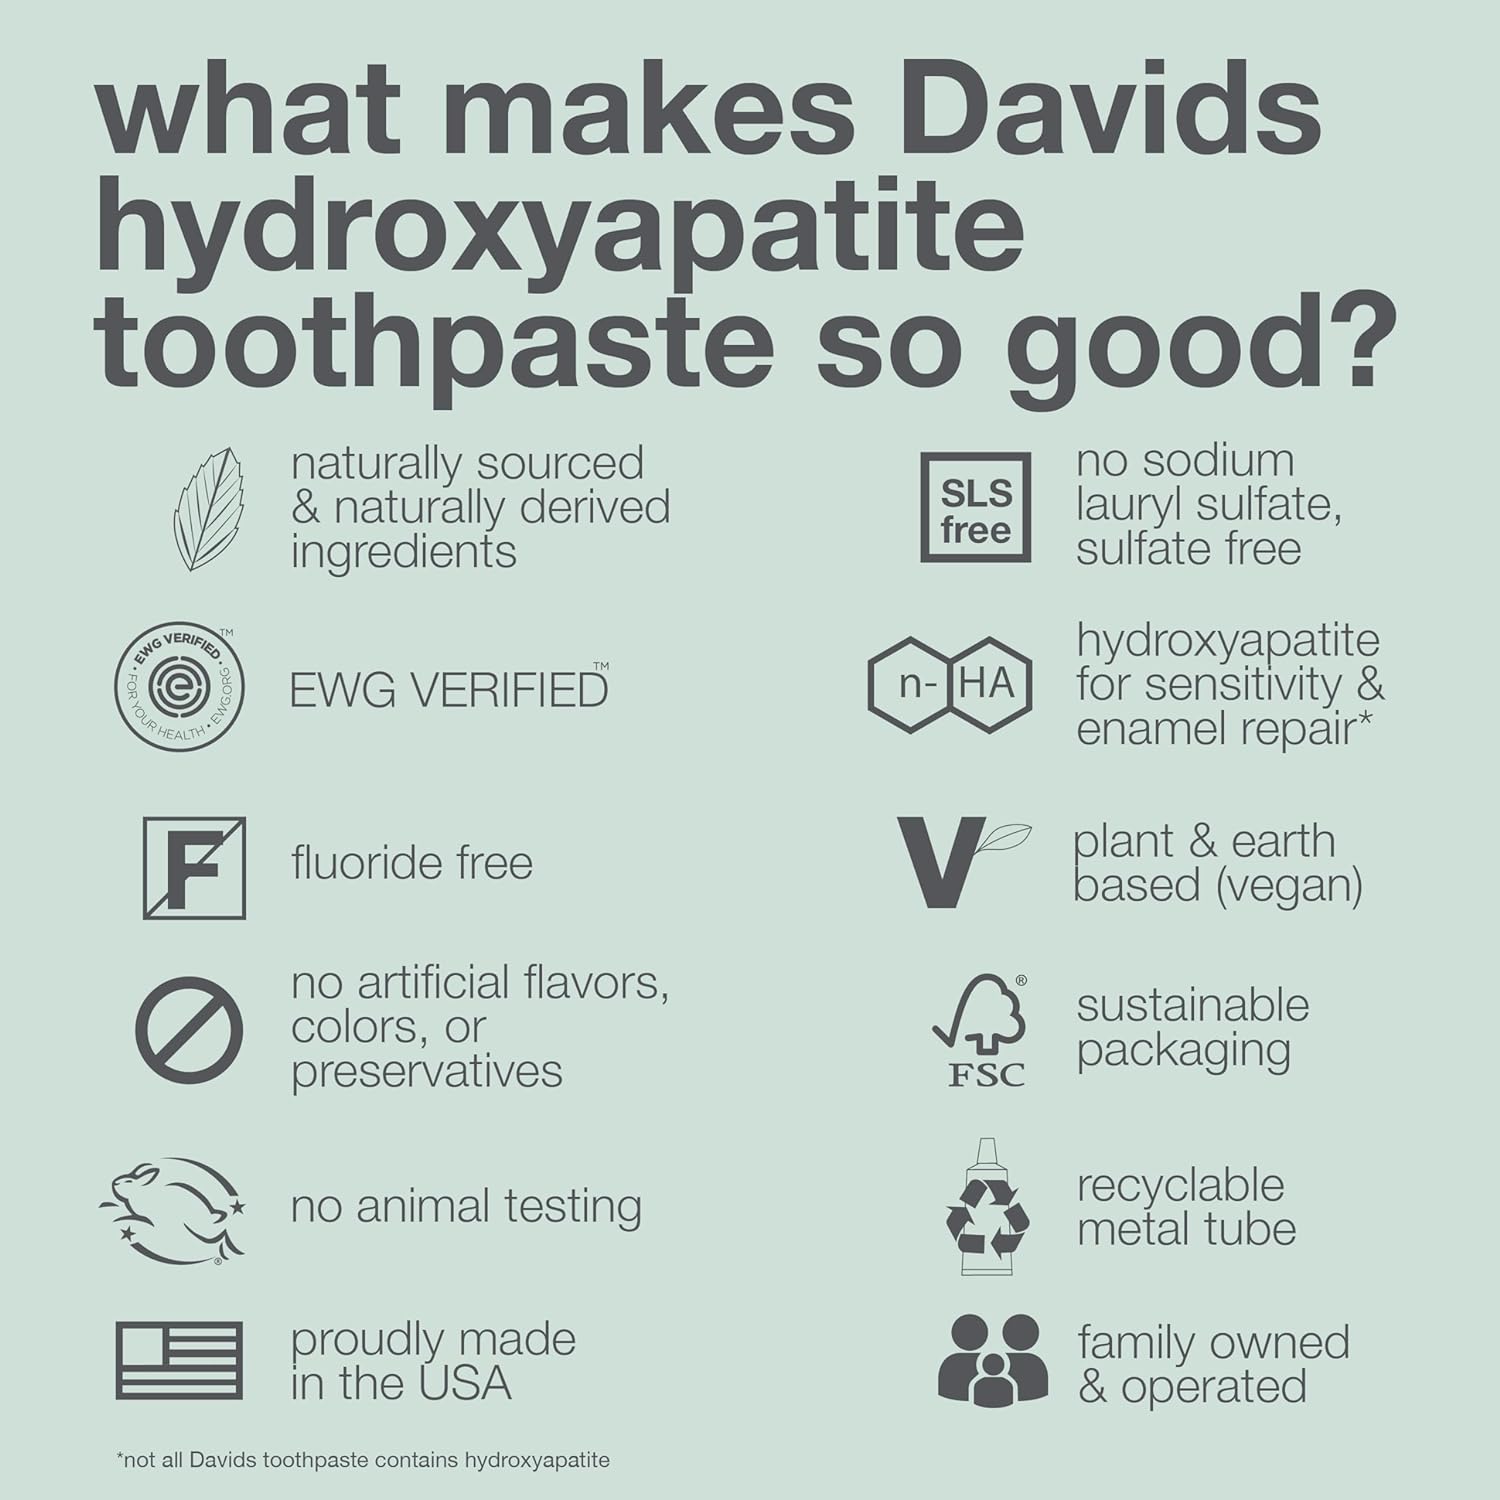 Davids Fluoride Free Nano Hydroxyapatite Toothpaste for Remineralizing Enamel & Sensitive Relief, Whitening, Antiplaque, SLS Free, Natural Peppermint, 5.25oz, Made in USA : Health & Household